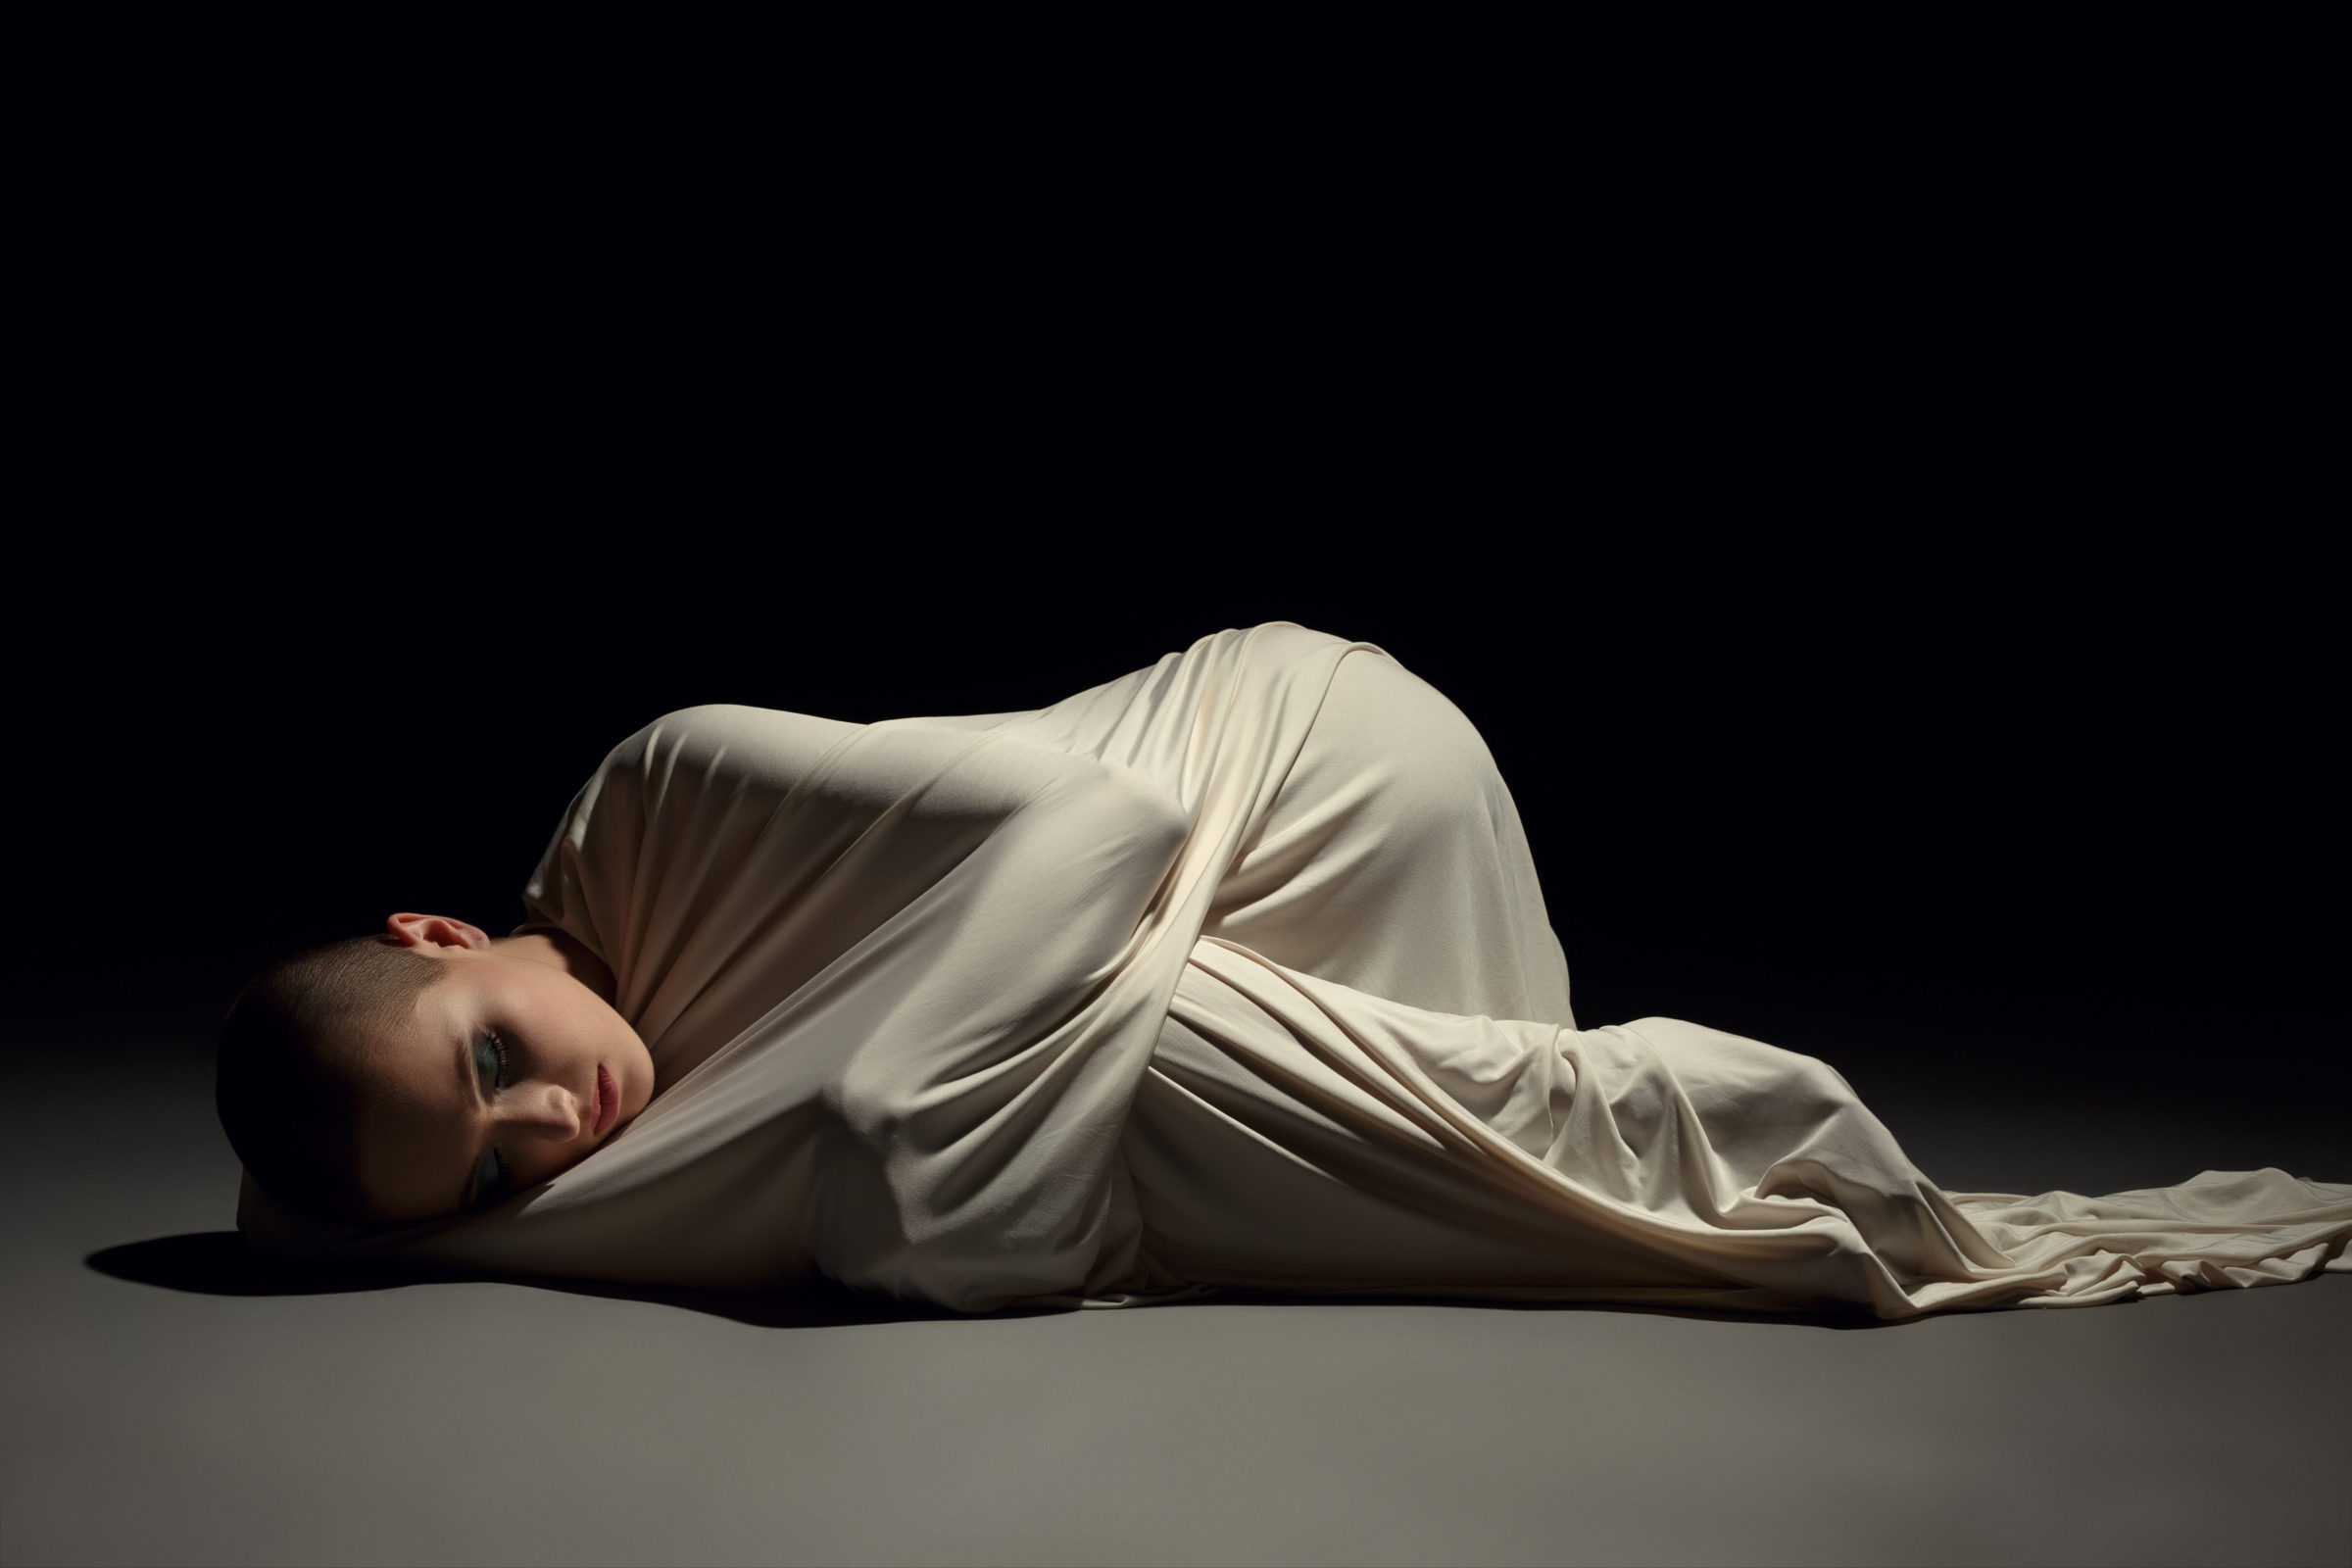 Studio image of mentally ill woman in straitjacket